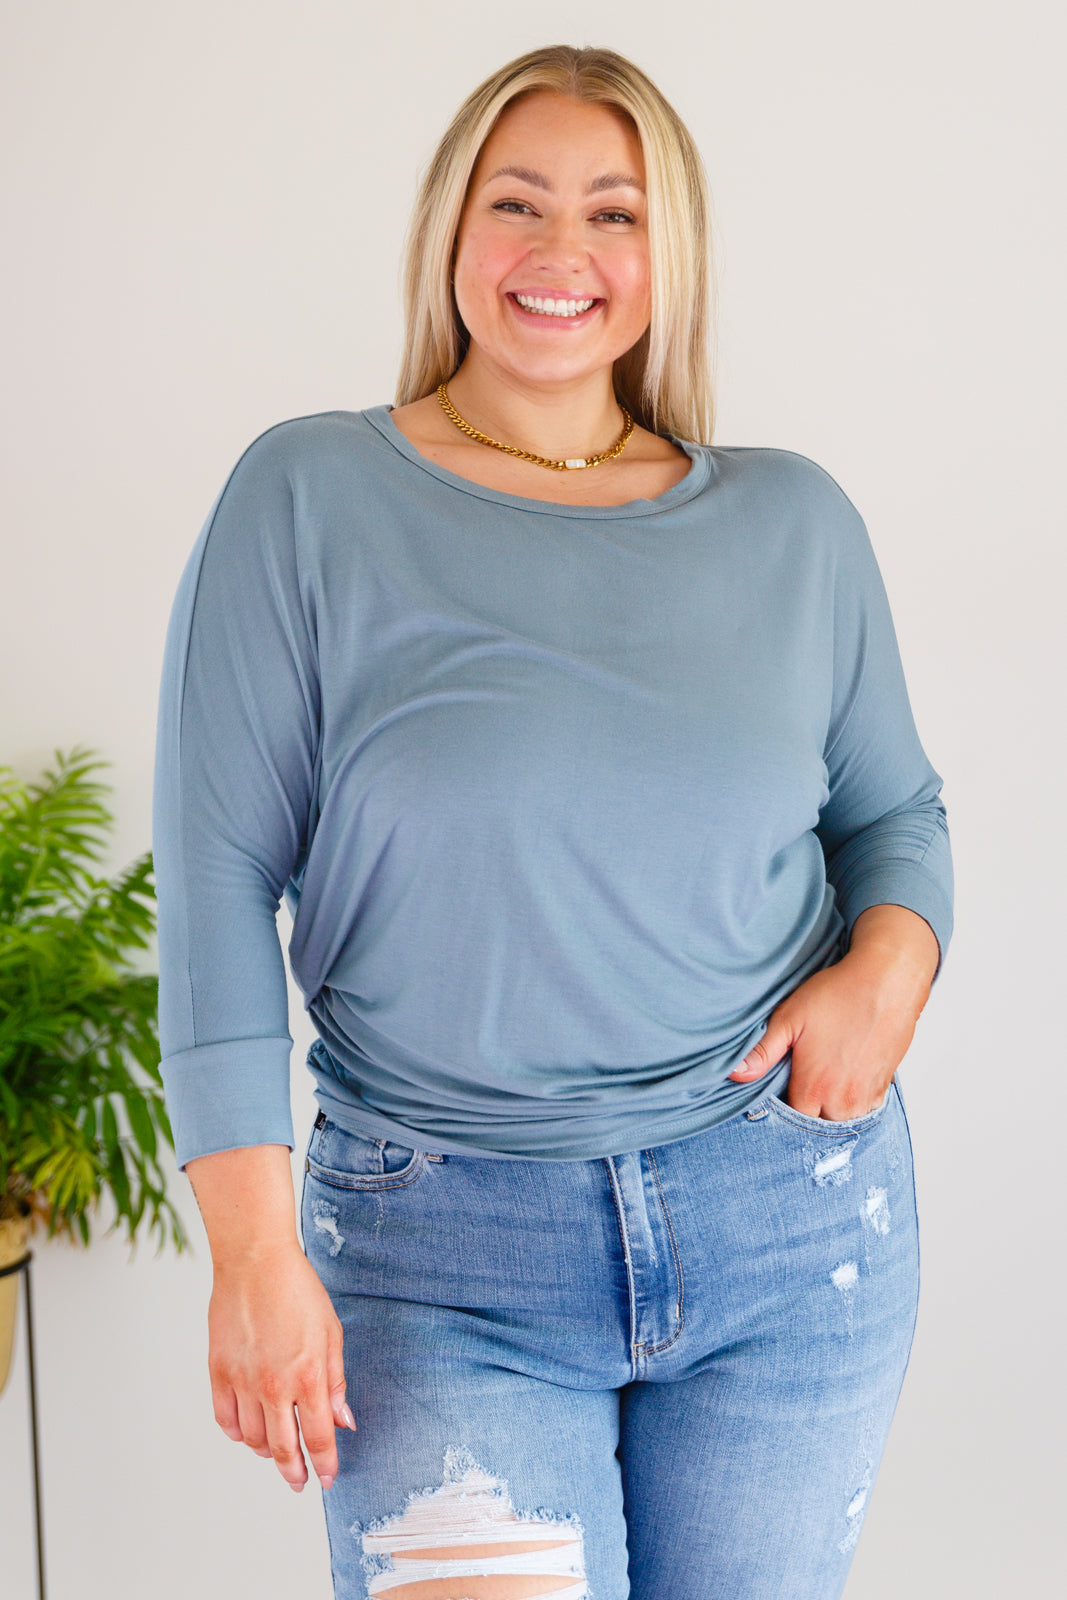 Daytime Boat Neck Top in Blue Gray-Tops-Inspired by Justeen-Women's Clothing Boutique in Chicago, Illinois